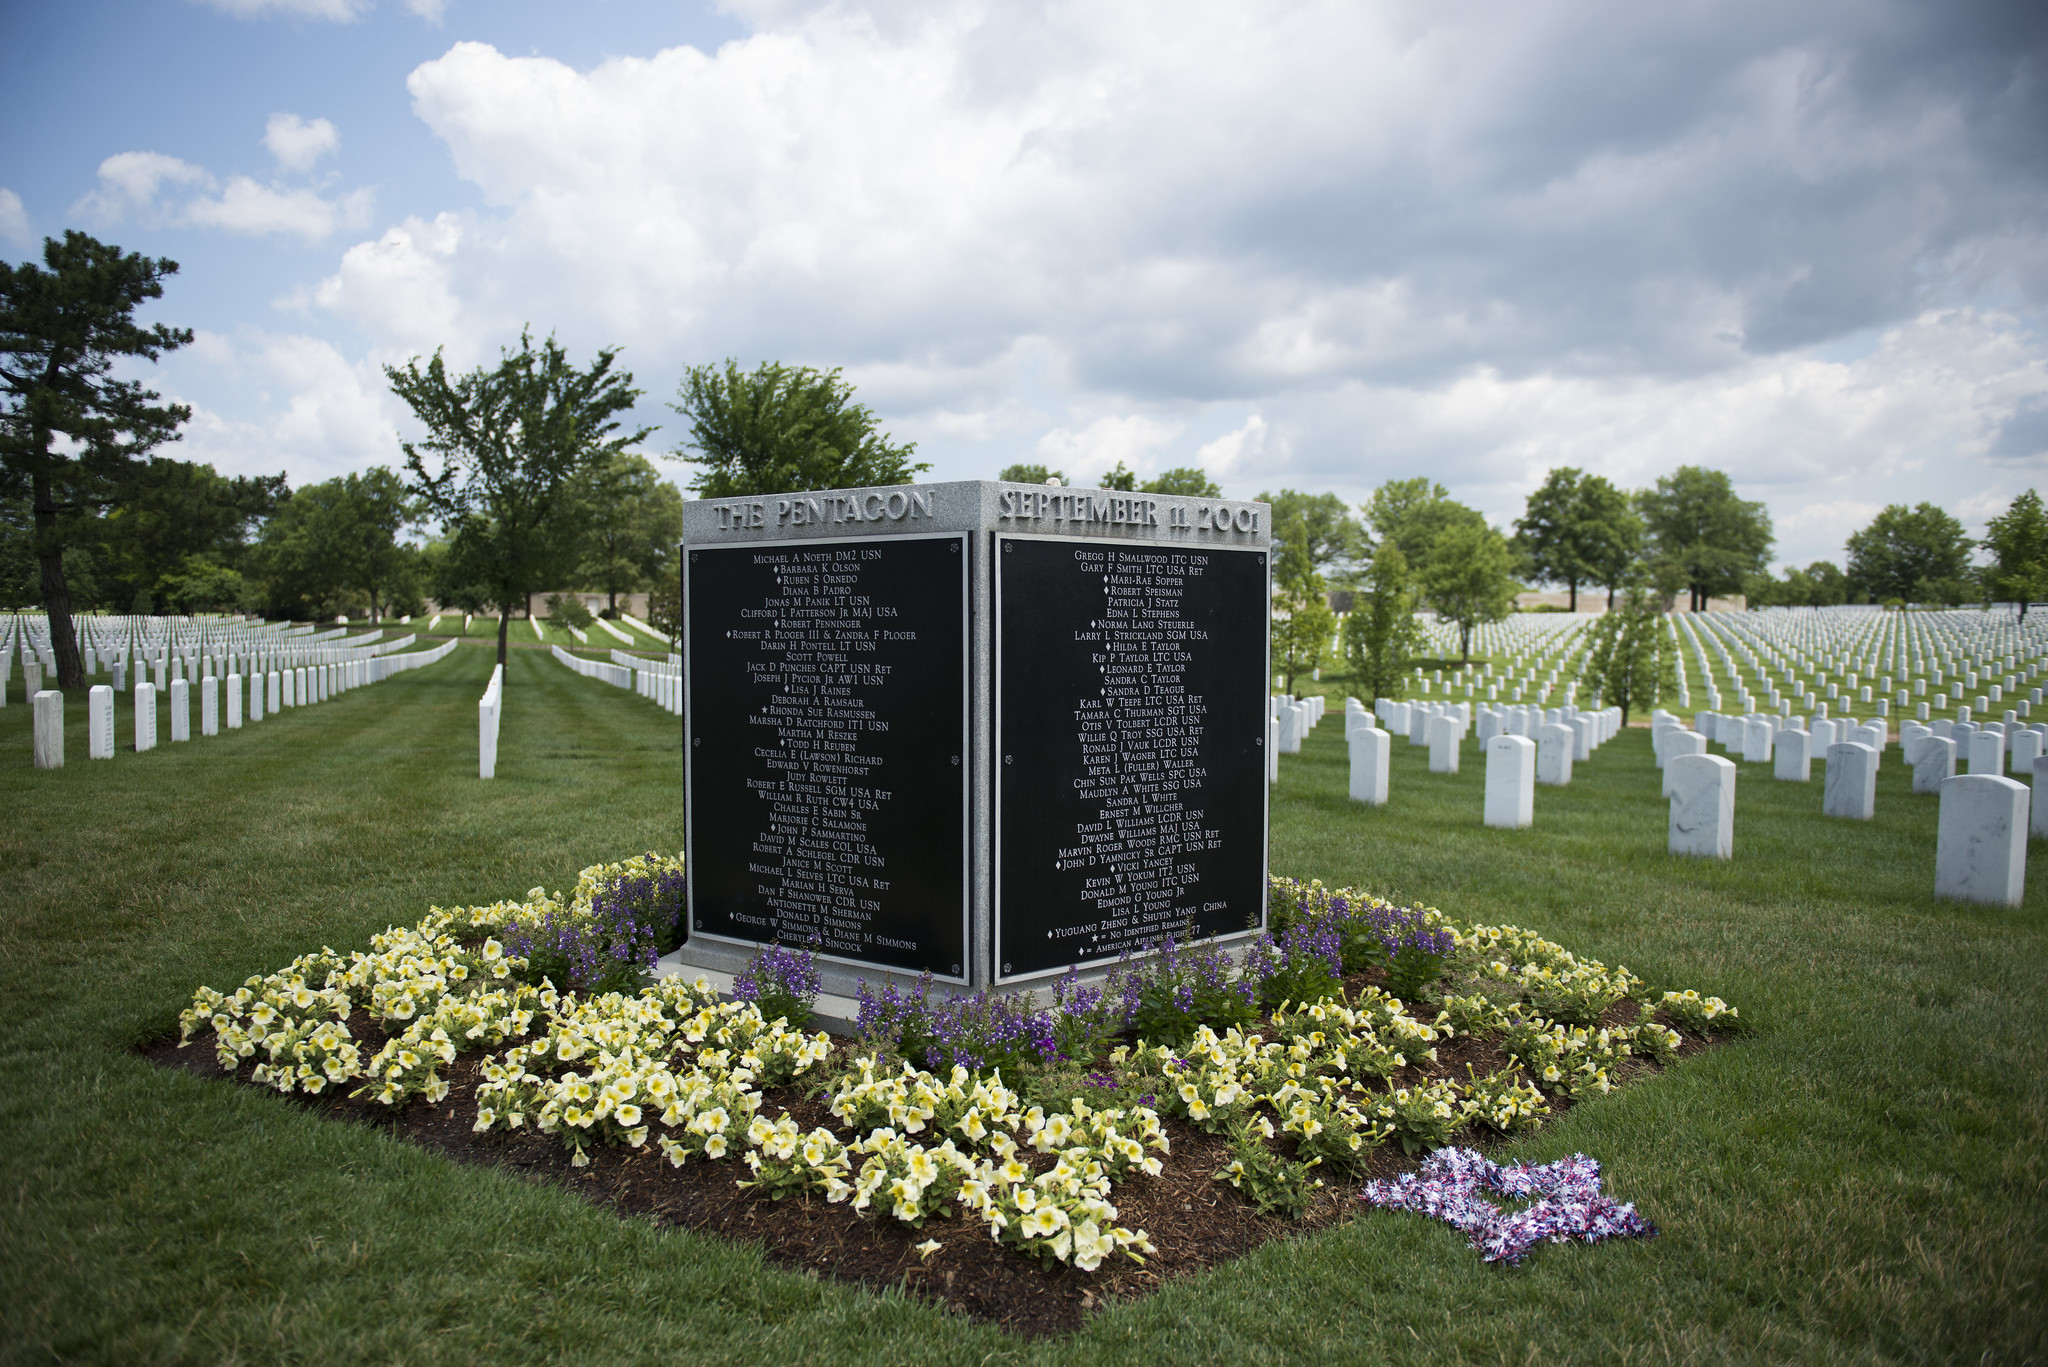 The Pentagon Group Burial Marker, with the names of the 184 victims of the 9/11 terrorist attack who died at the Pentagon or aboard American Airlines flight 77